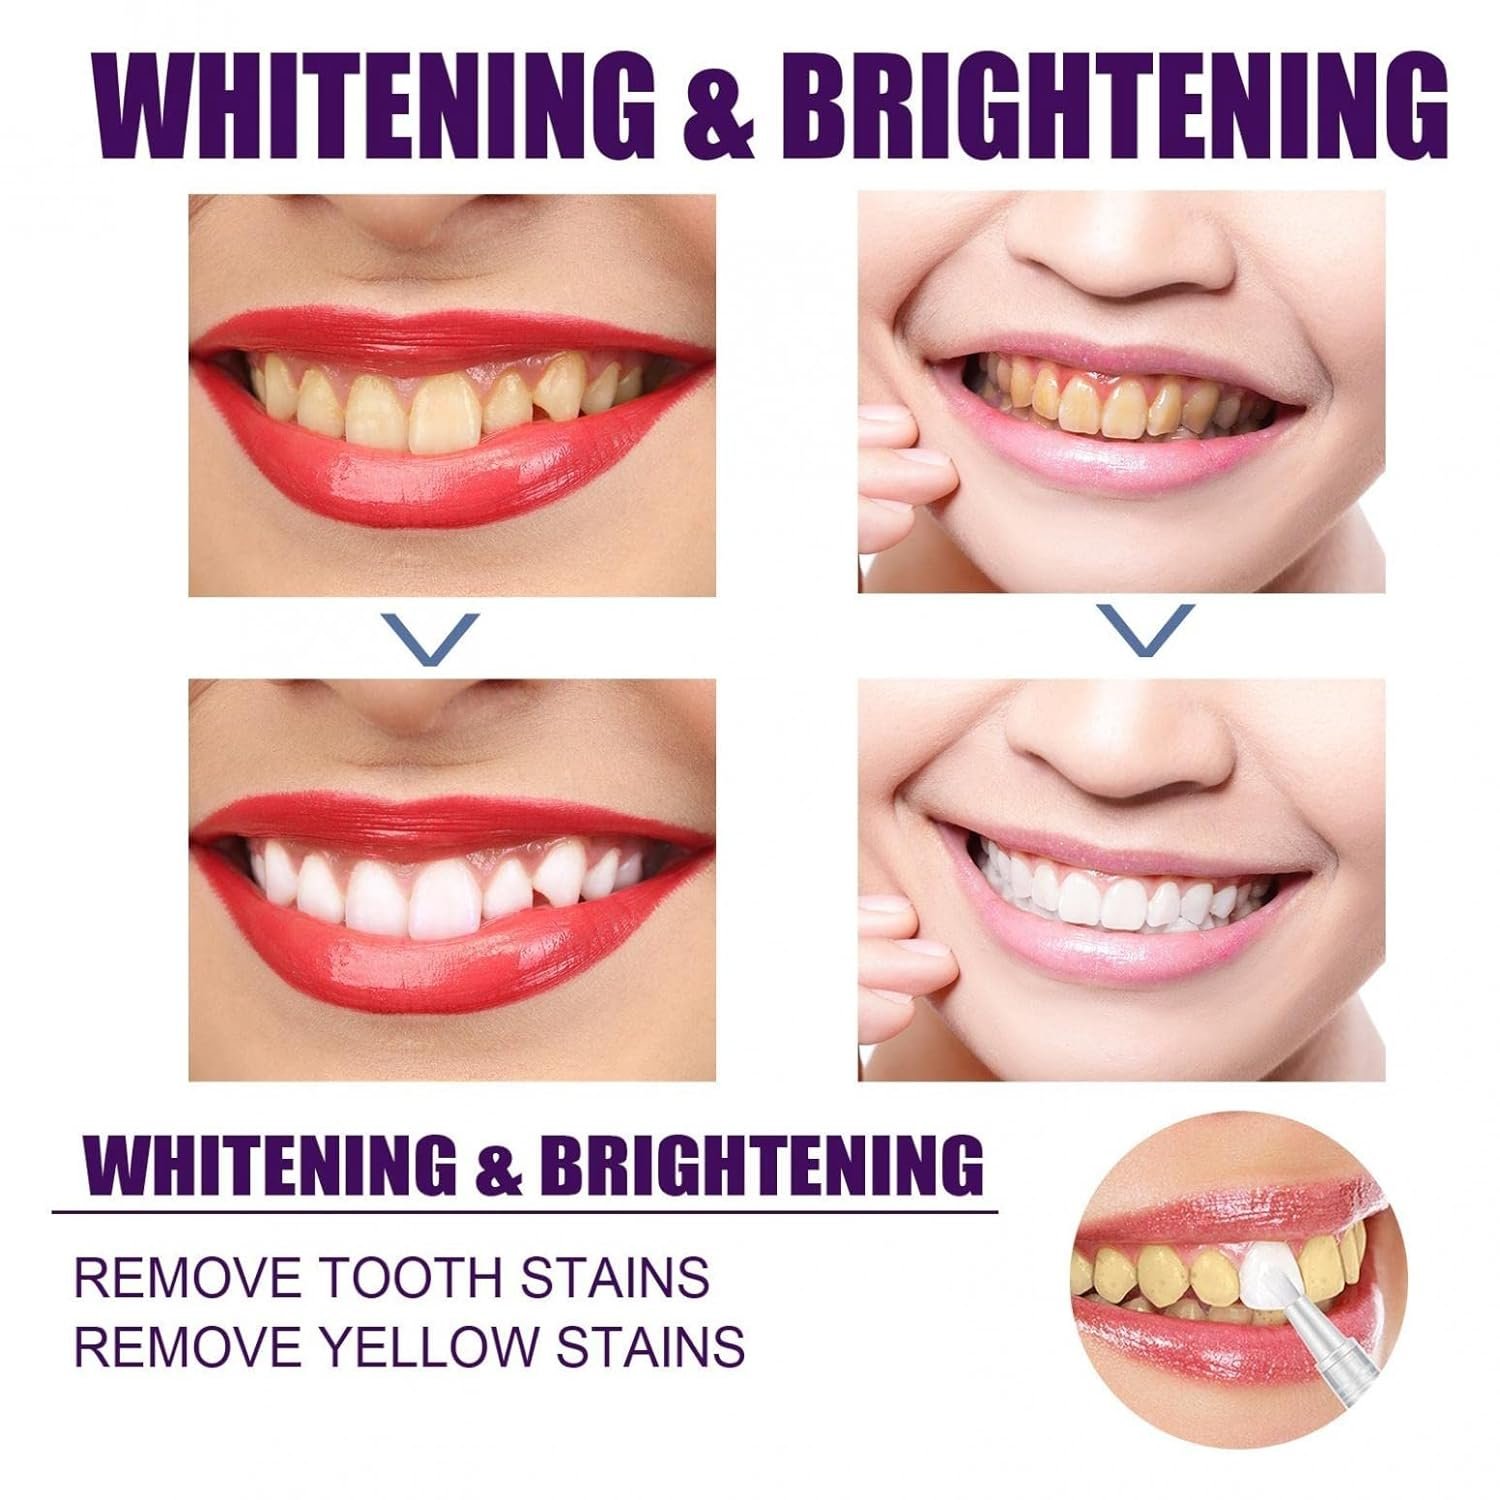 ZITIANY Teeth Whitening Pen, Teeth Stain Remover to Whiten Teeth, Effective＆Painless, No Sensitivity, Travel-Friendly, Easy to Use, Beautiful White Smile, Oral Care, 1PC/4PCS